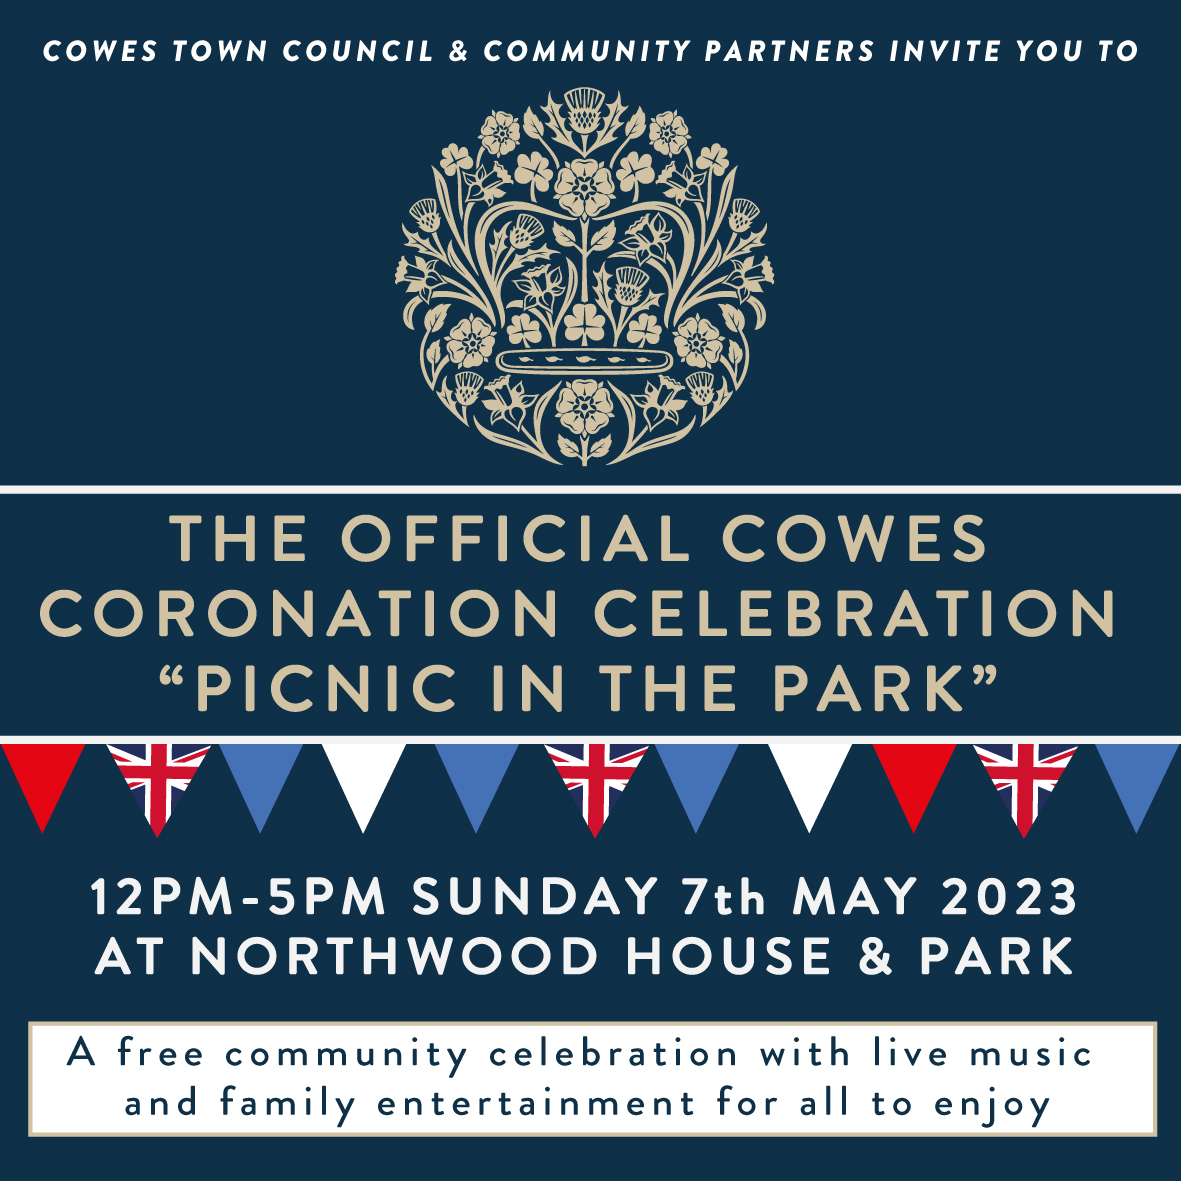 The Cowes Official Coronation Celebration “Picnic in the Park”